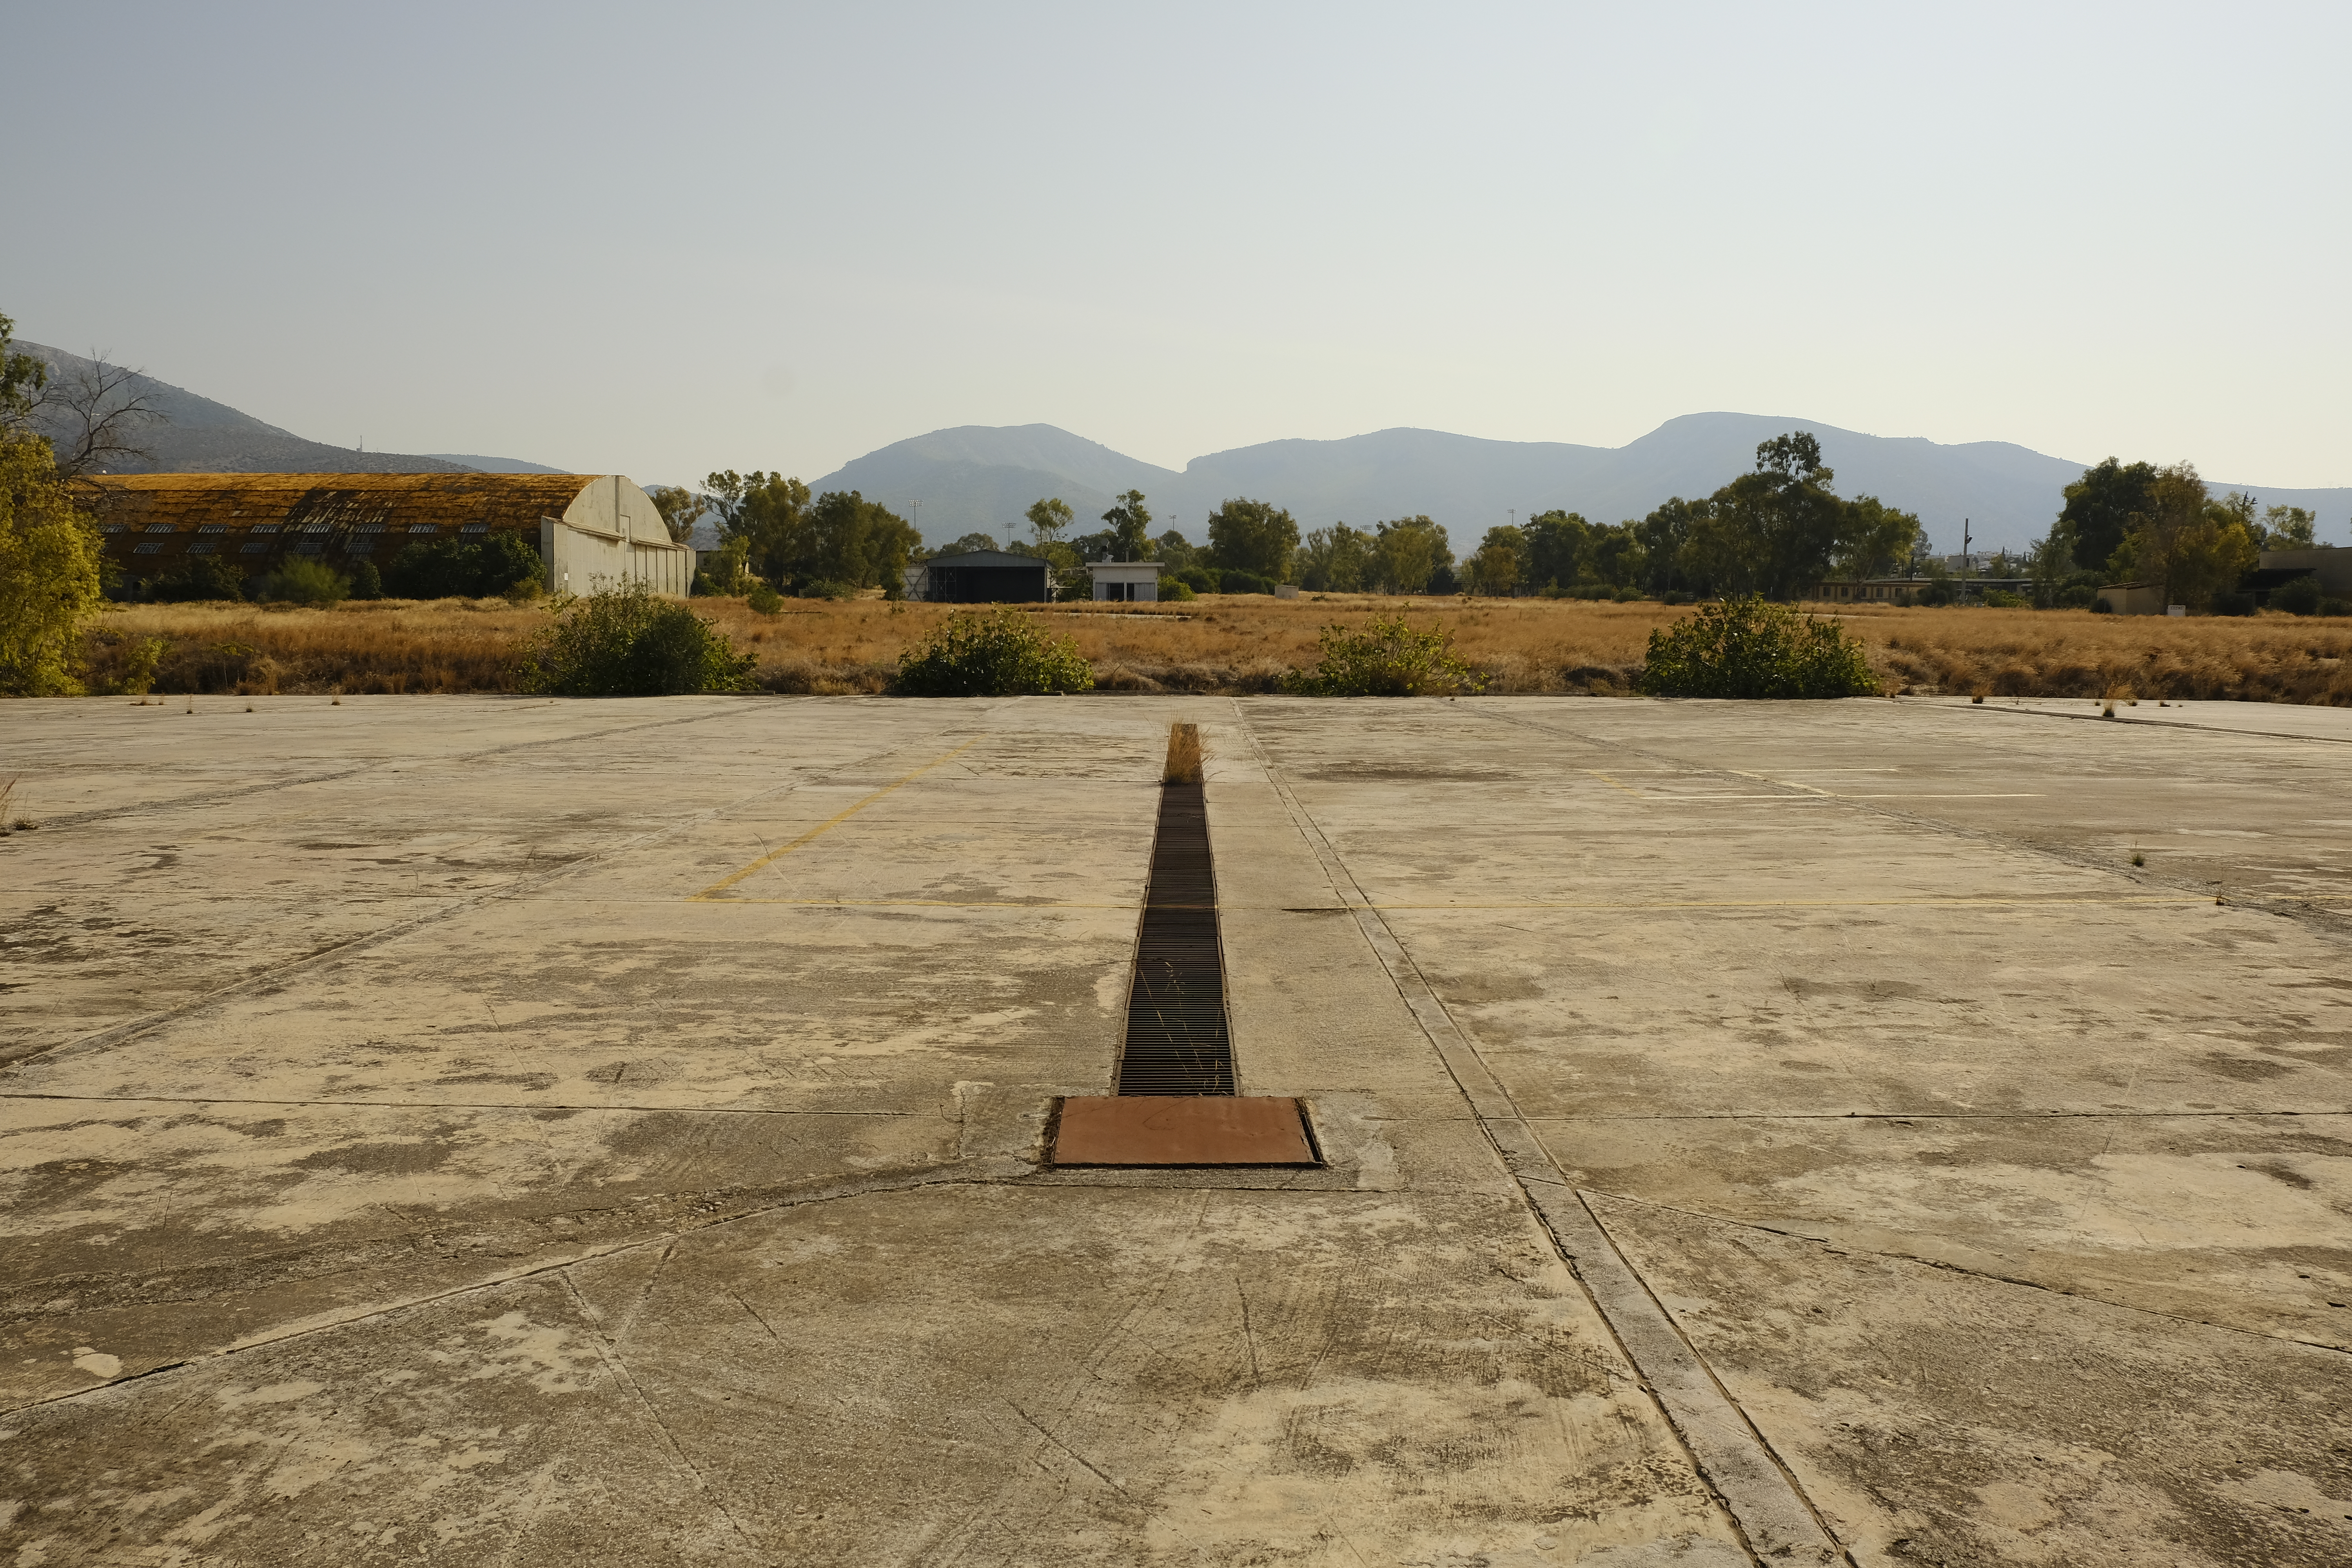 The abandoned Ellinikon airport before being transformed into the Experience Park, Athens